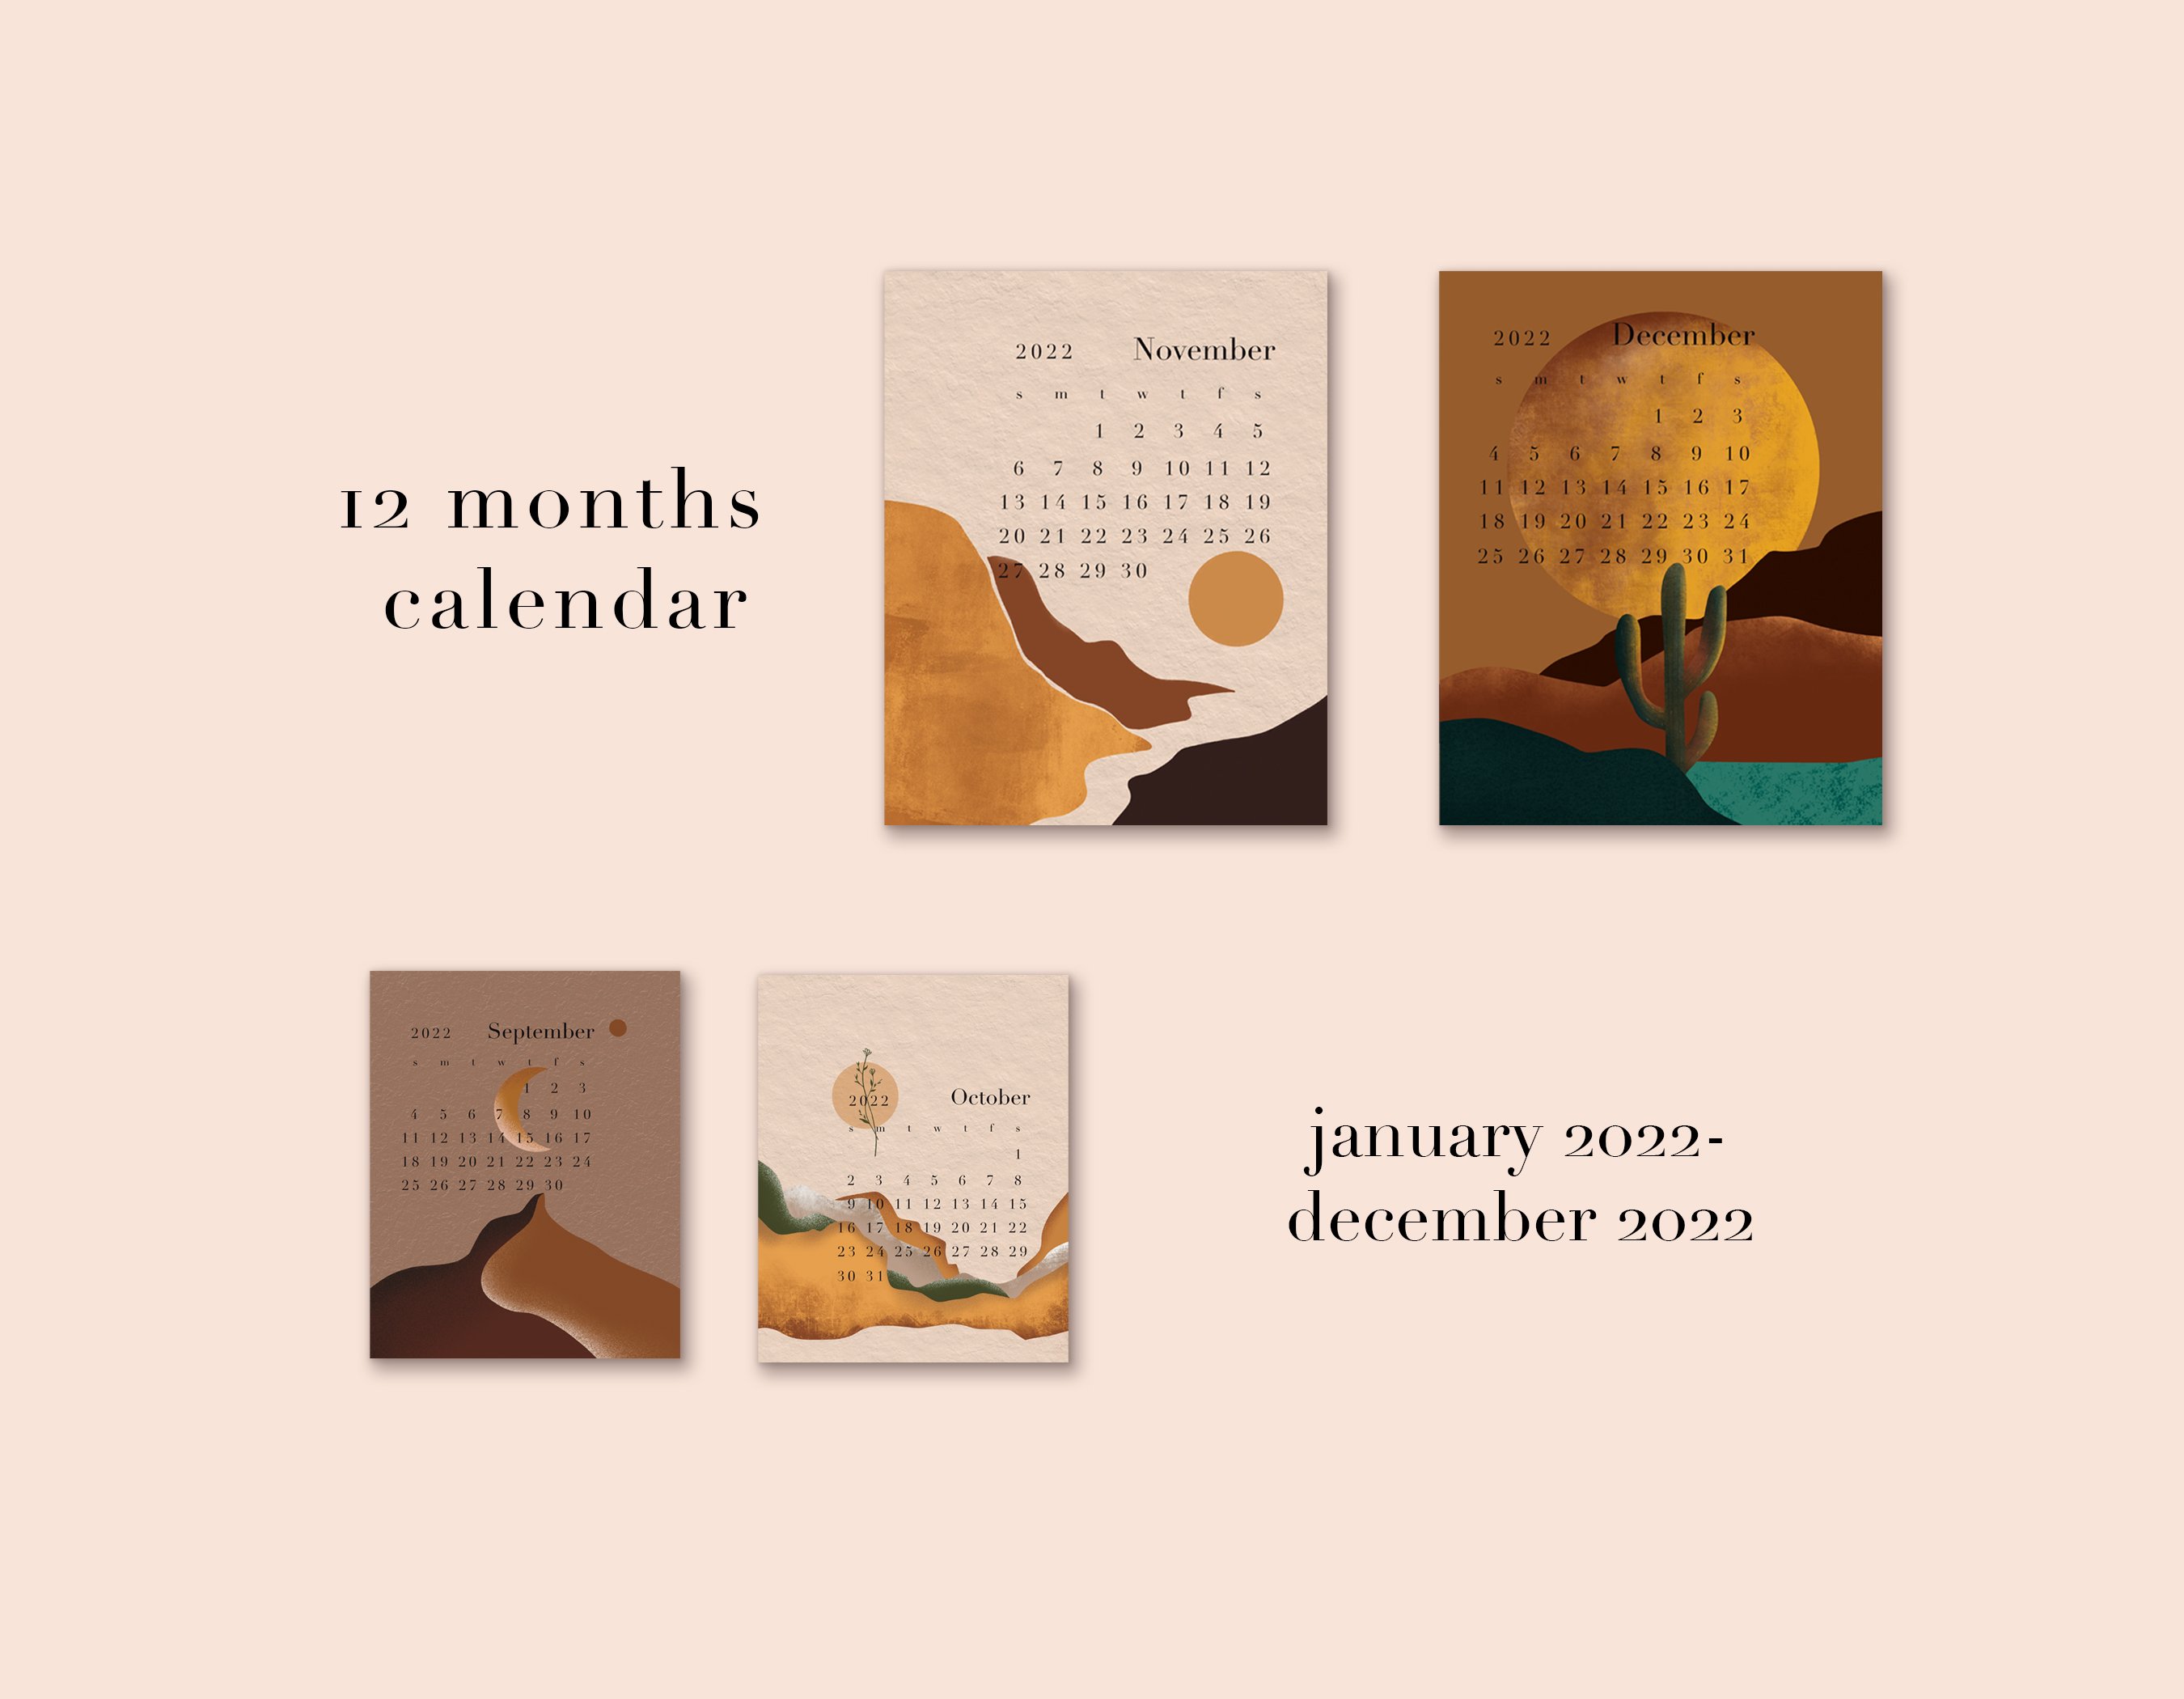 Calendar with the abstract illustration.